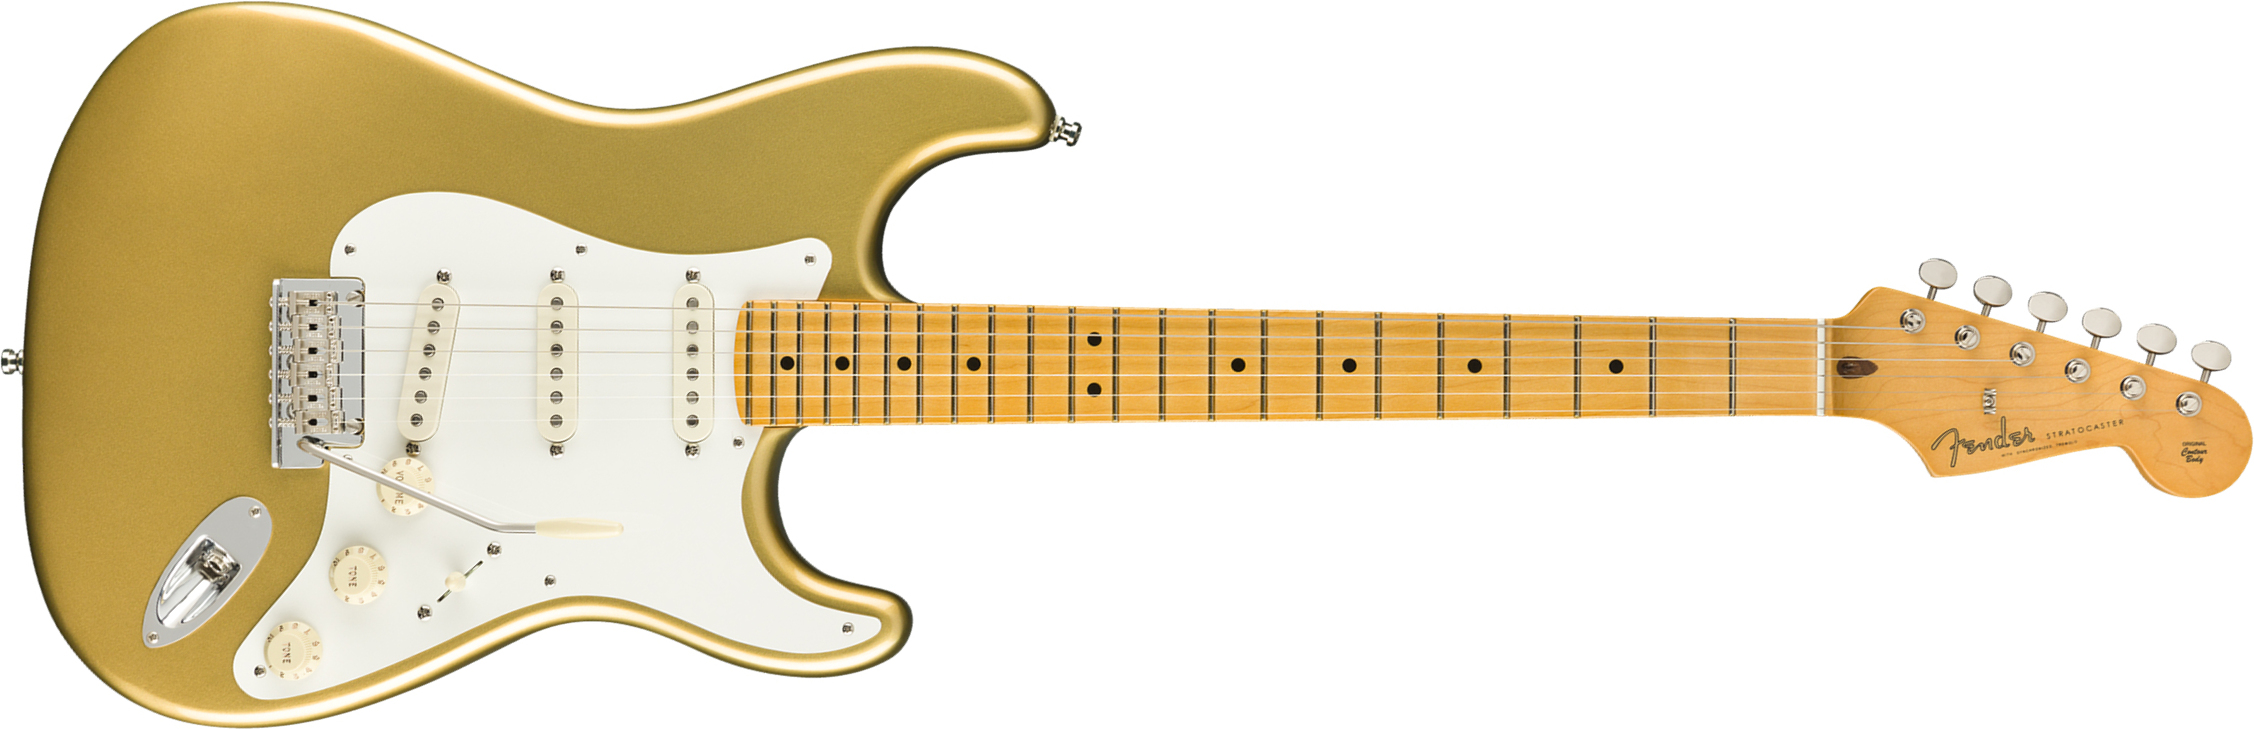 Fender Strat Lincoln Brewster Usa Signature Mn - Aztec Gold - Str shape electric guitar - Main picture